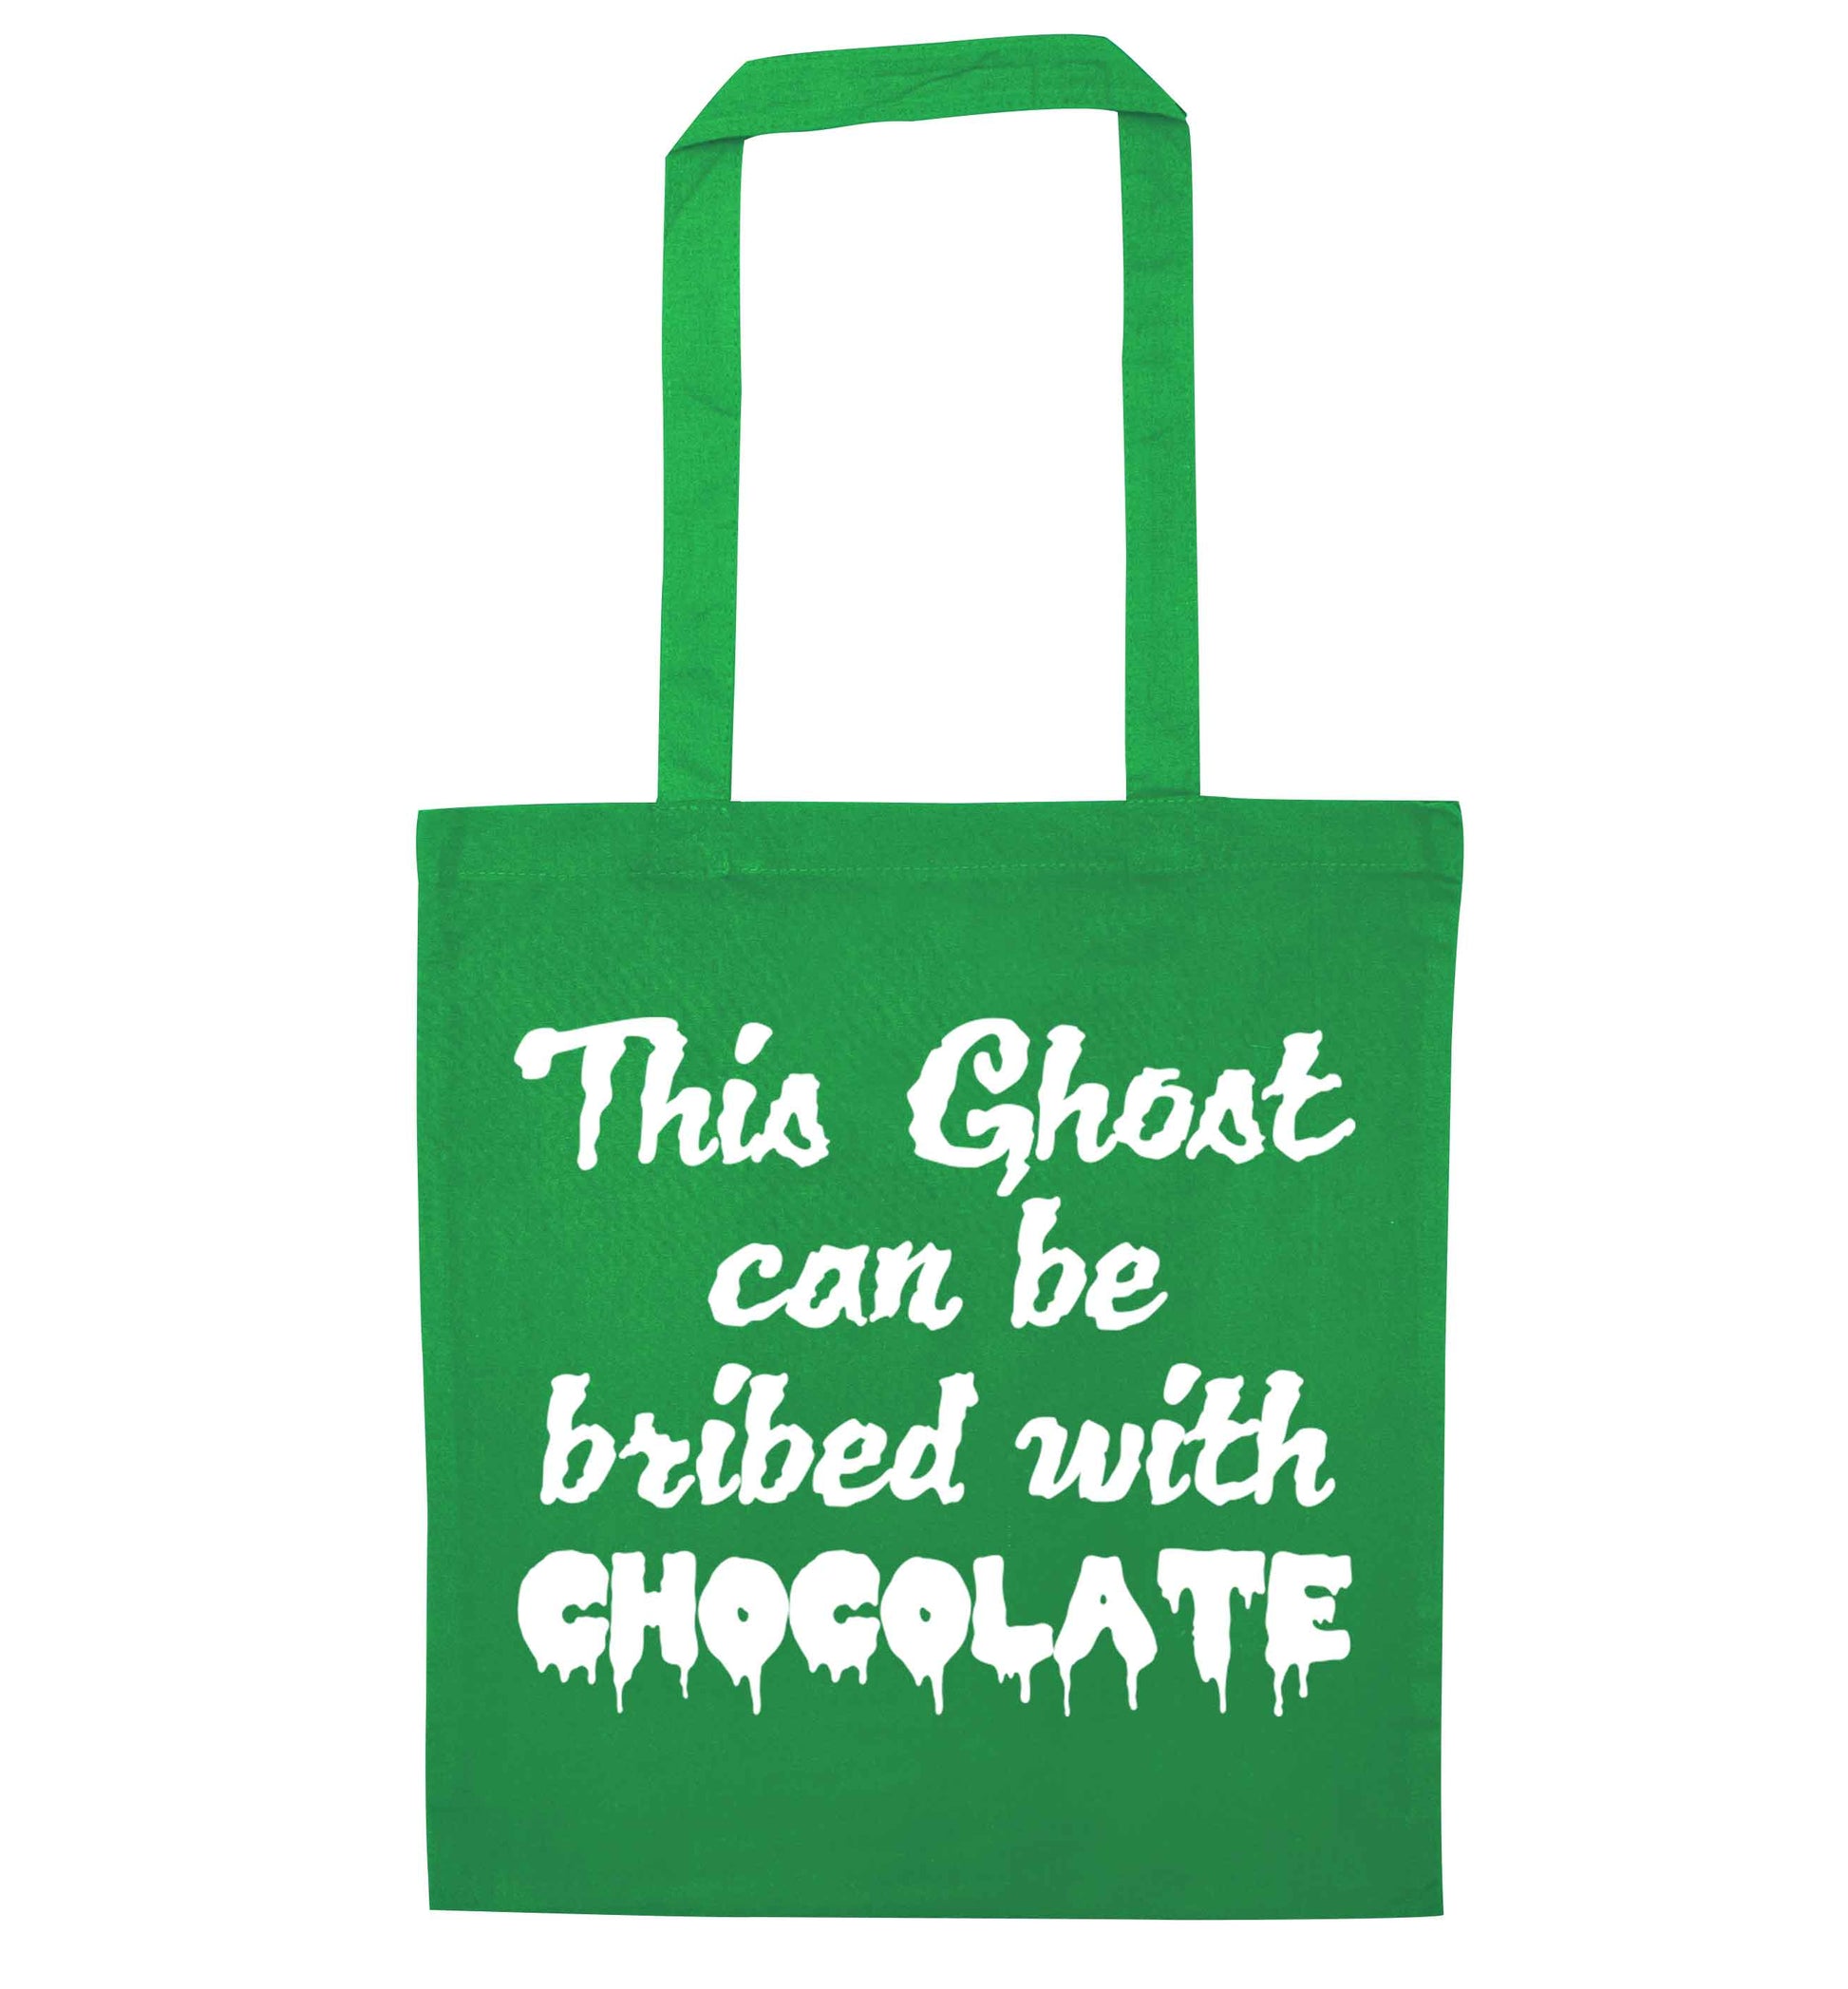 This ghost can be bribed with chocolate green tote bag